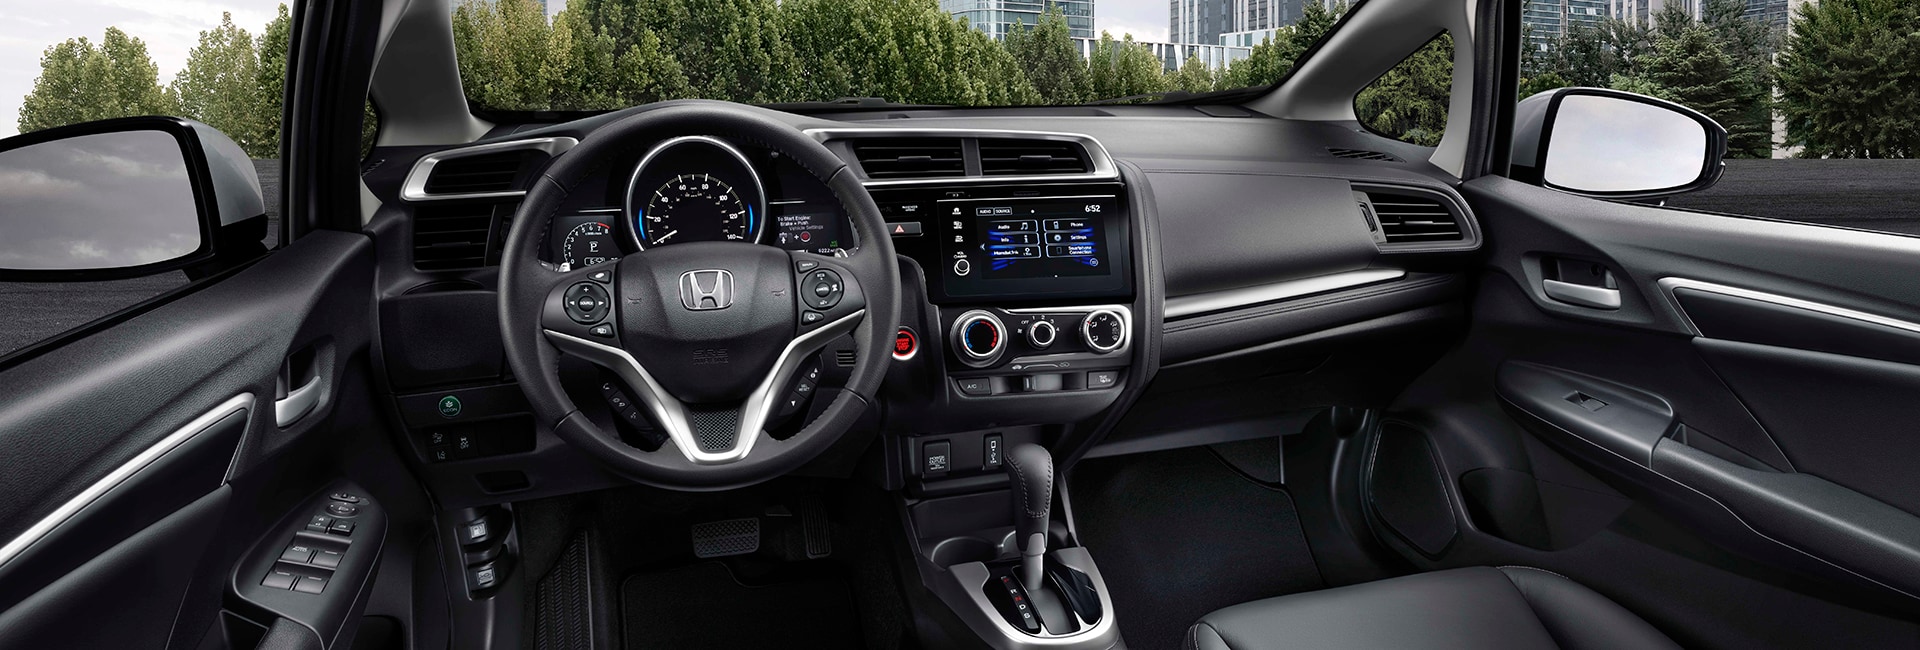 Honda Fit Interior and Exterior Vehicle Features